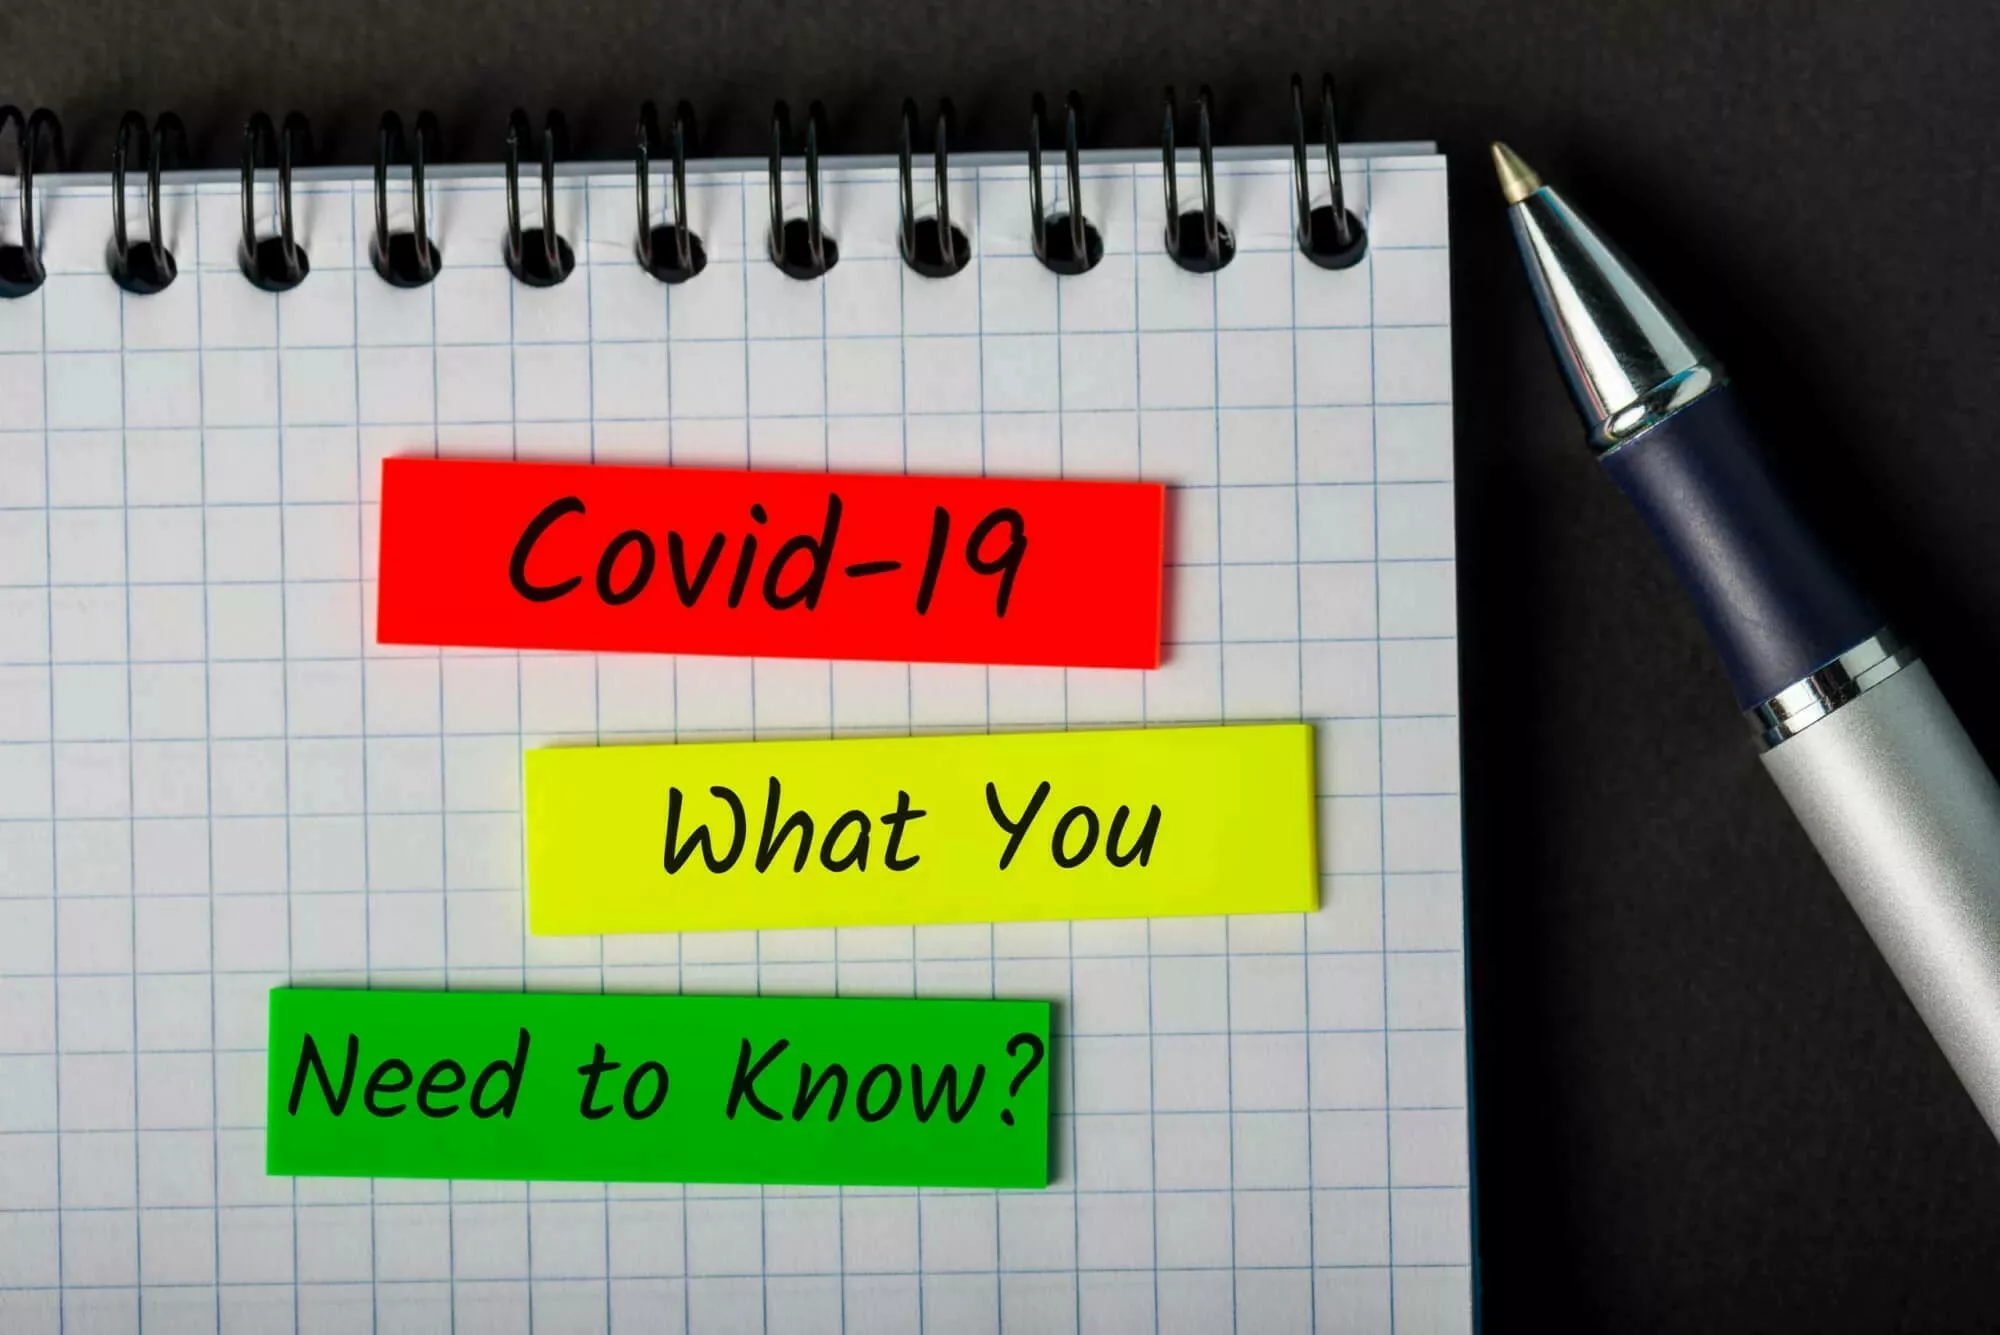 Paper and pen with text "COVID-19 What you need to know?"